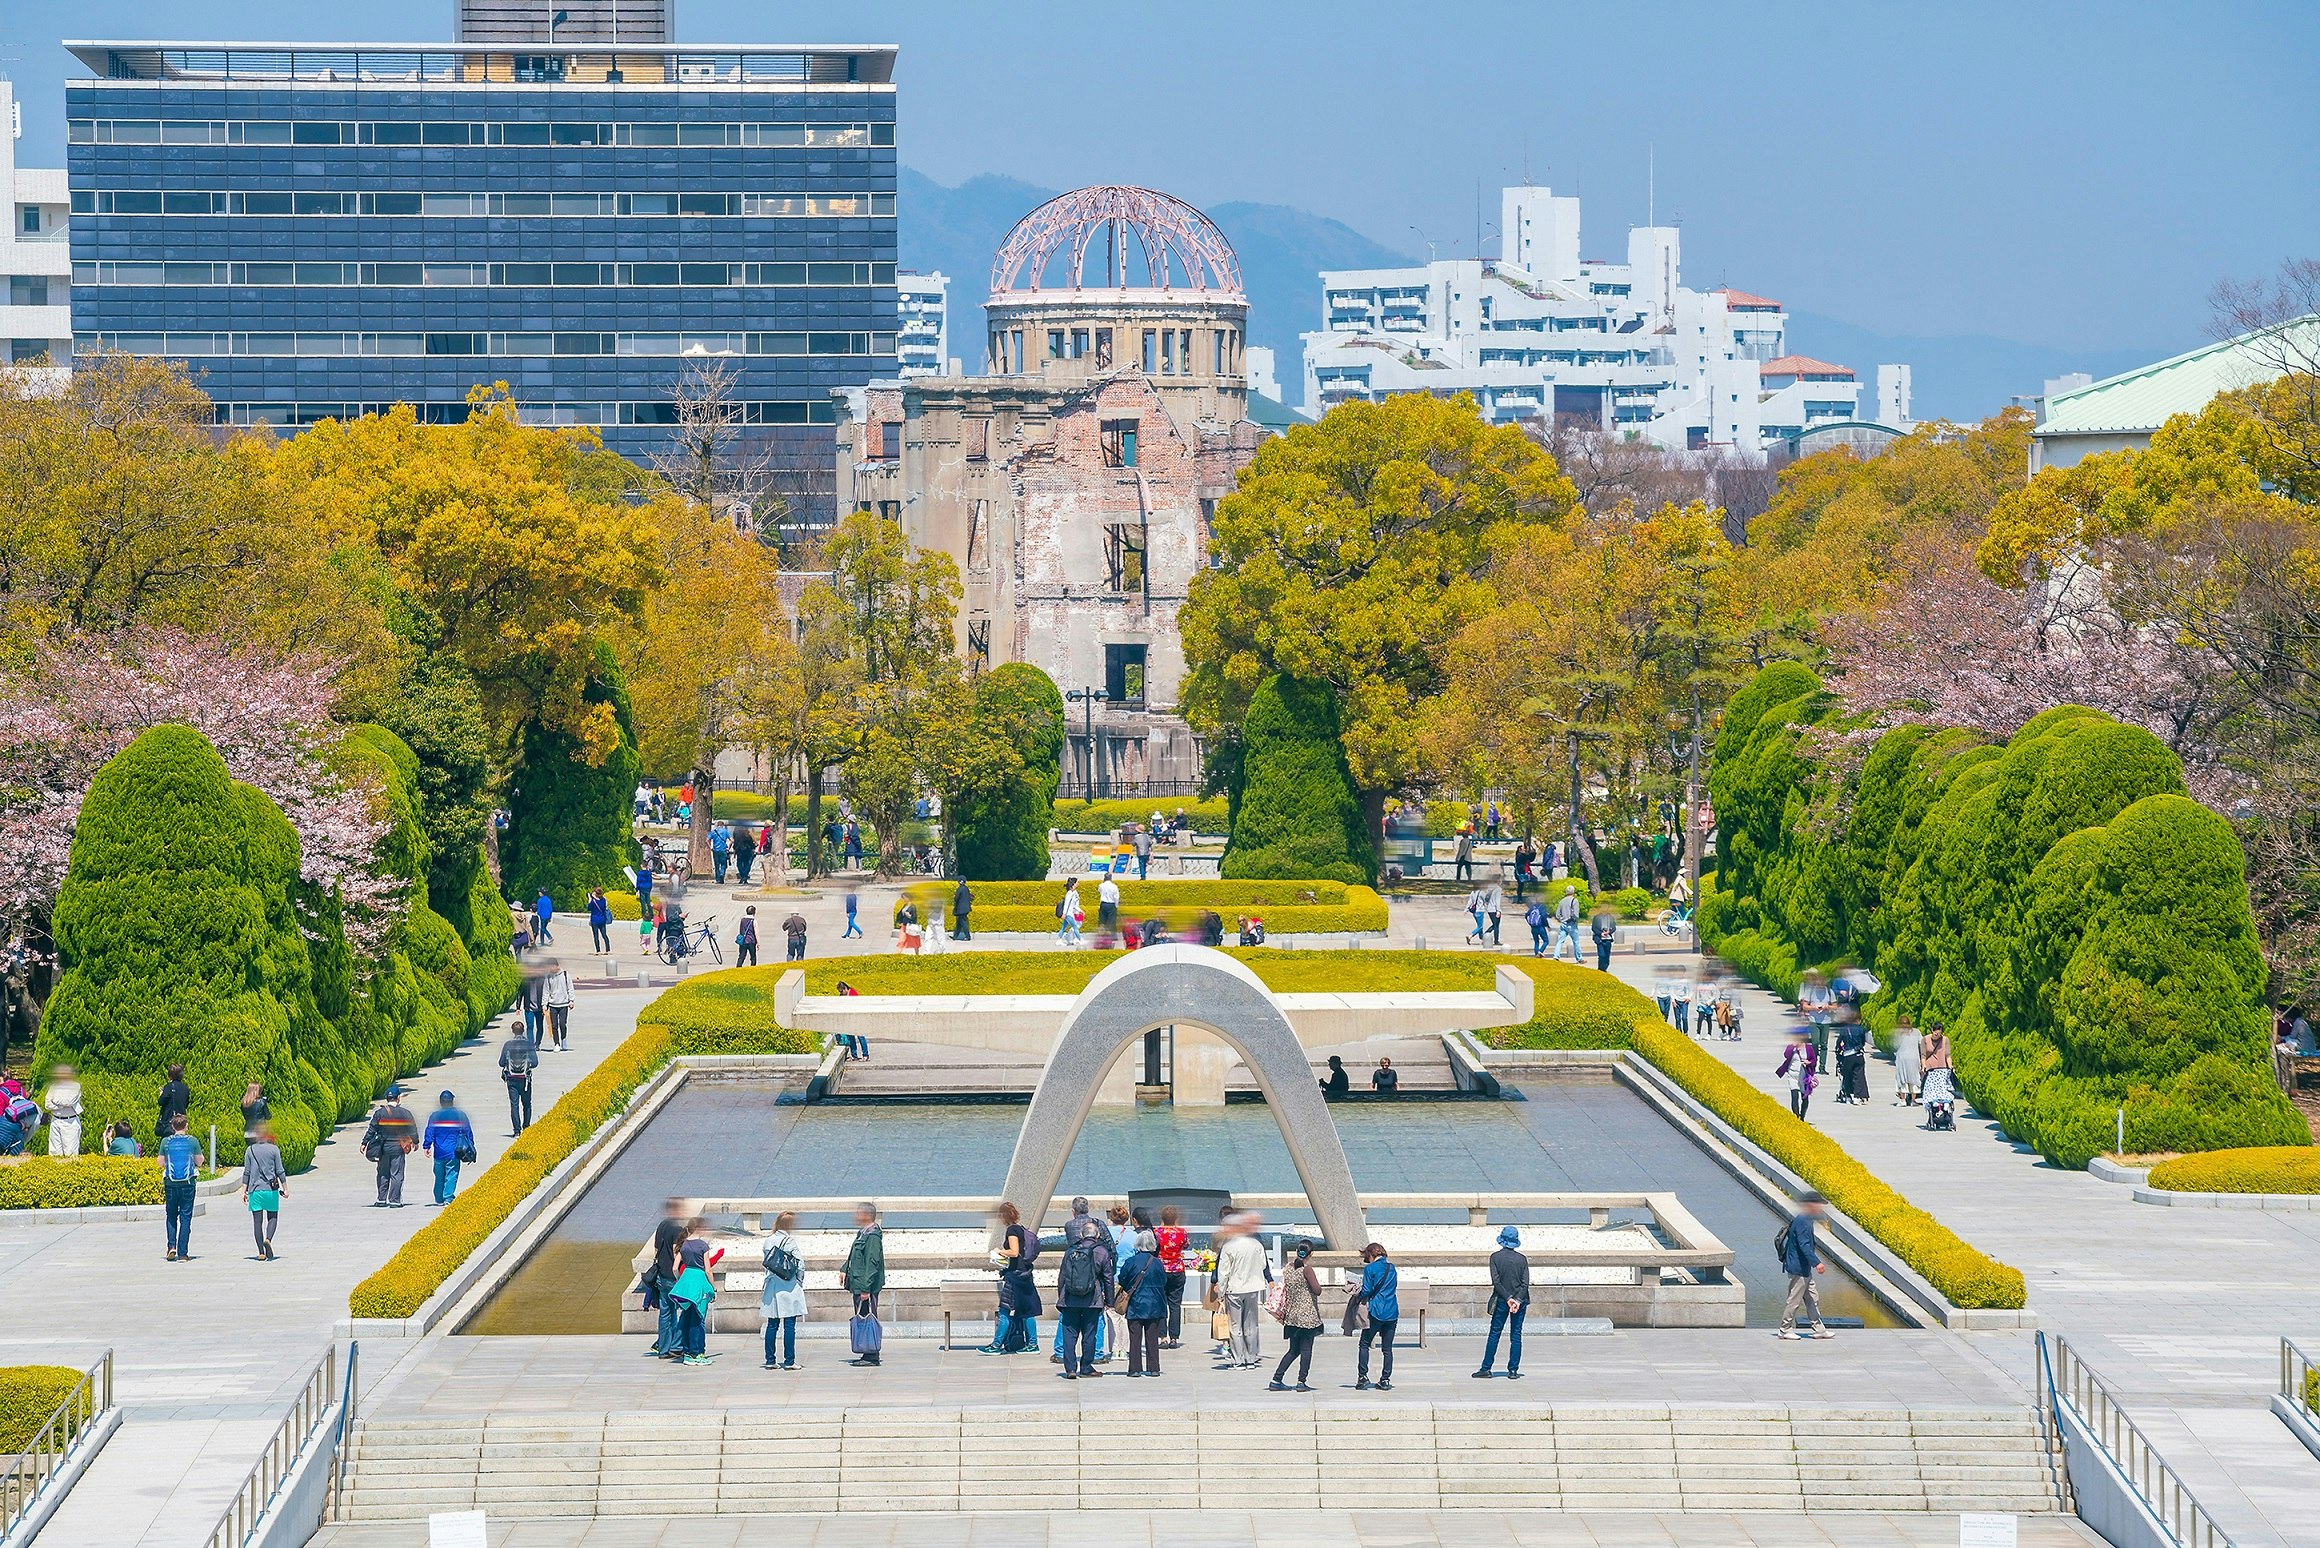 An aerial view overlooking the Peace Memorial Park in Hiroshima. The park has a small pond in the centre of it, with trees and lawns all around it. Many people wander along the pathways flanking the pond.